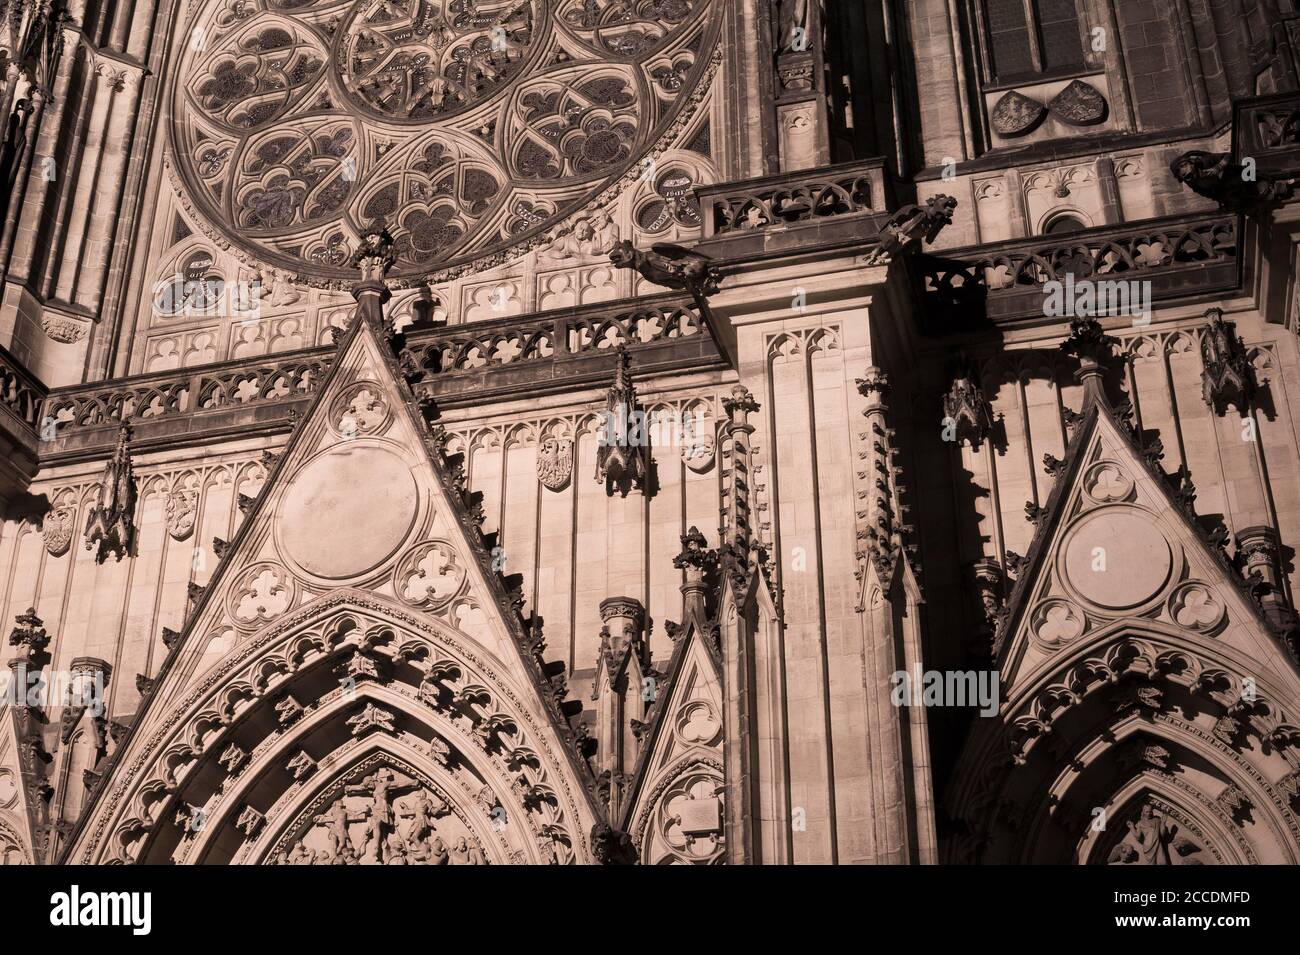 Saint Vitus Cathedral, Prague, Czech Republic / Czechia - detail of gothic landmark and monument. Pointed arch and decorated facade Stock Photo